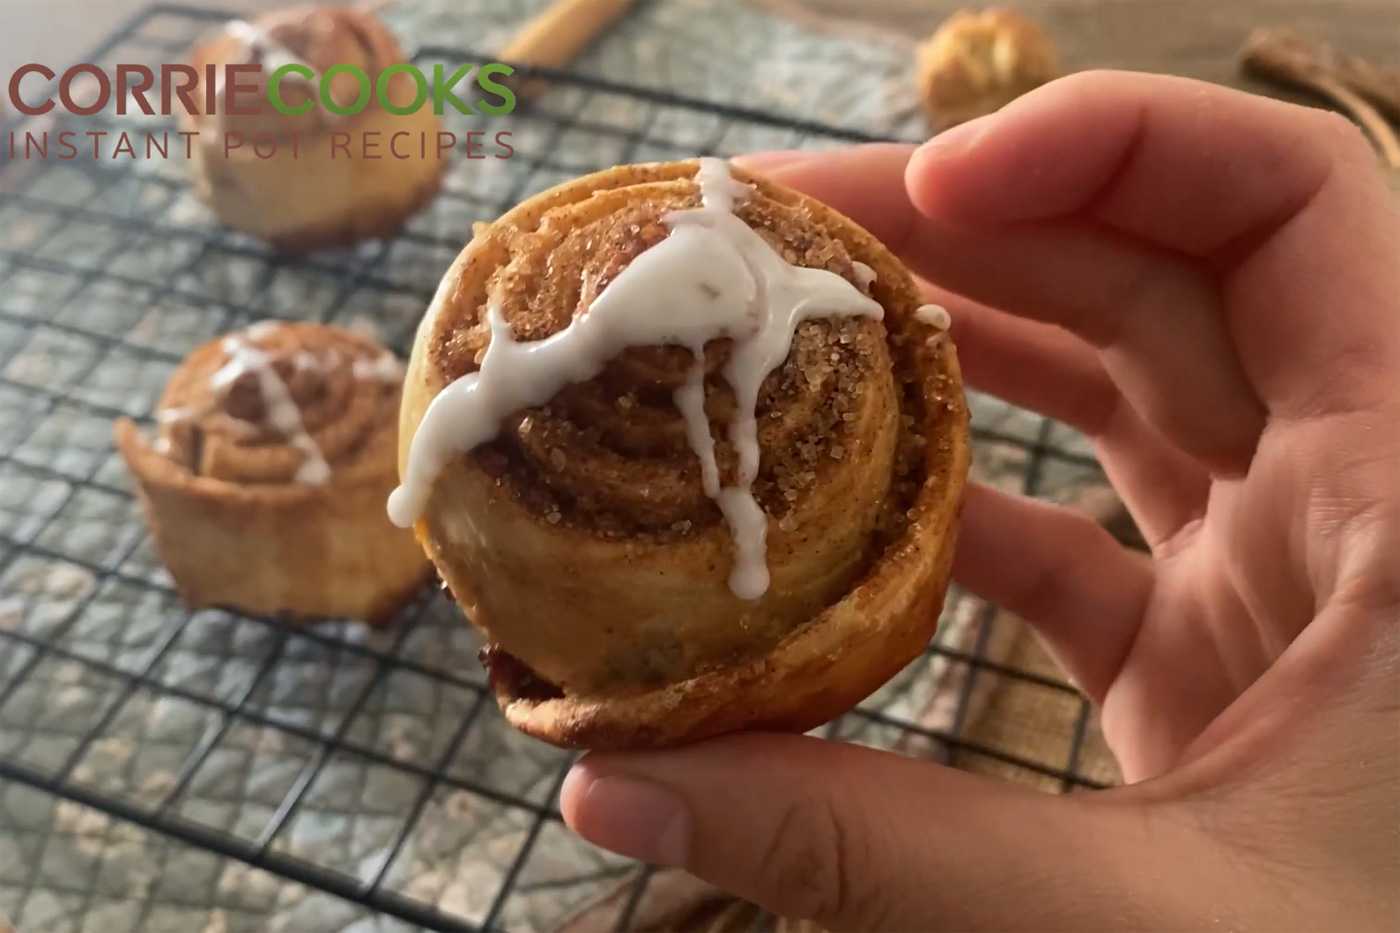 Hand holding cooked cinnamon roll topped with cinnamon and sugar and cream cheese